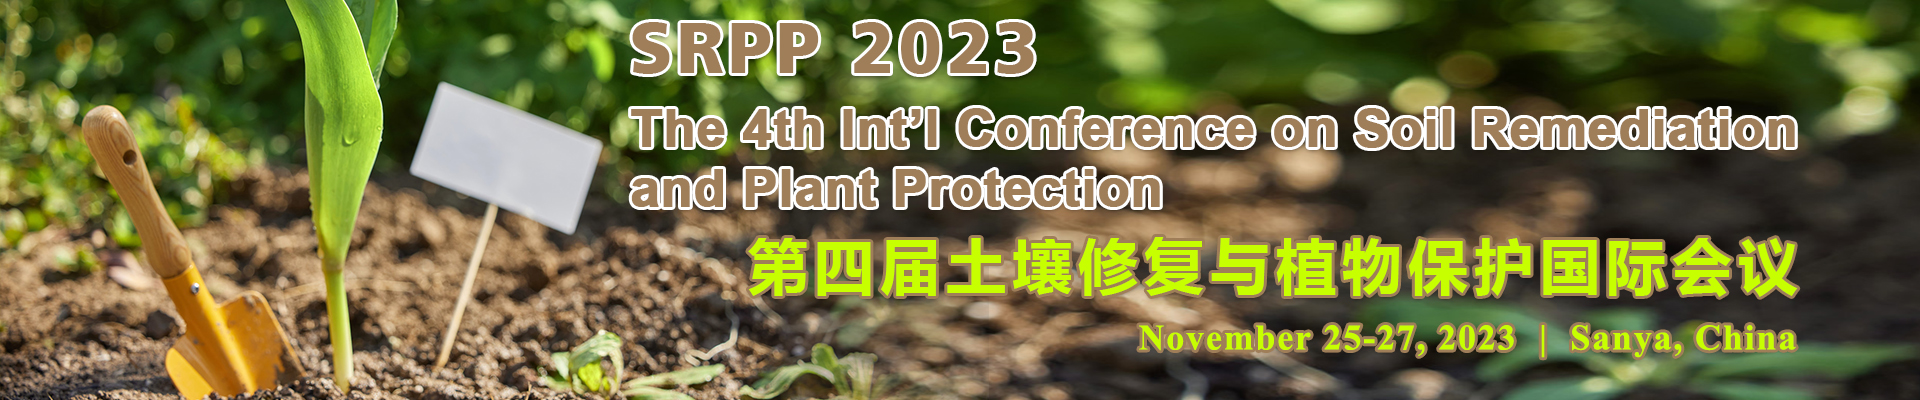 The 4th Int'l Conference on Soil Remediation and Plant Protection (SRPP 2023), Sanya, Hainan, China